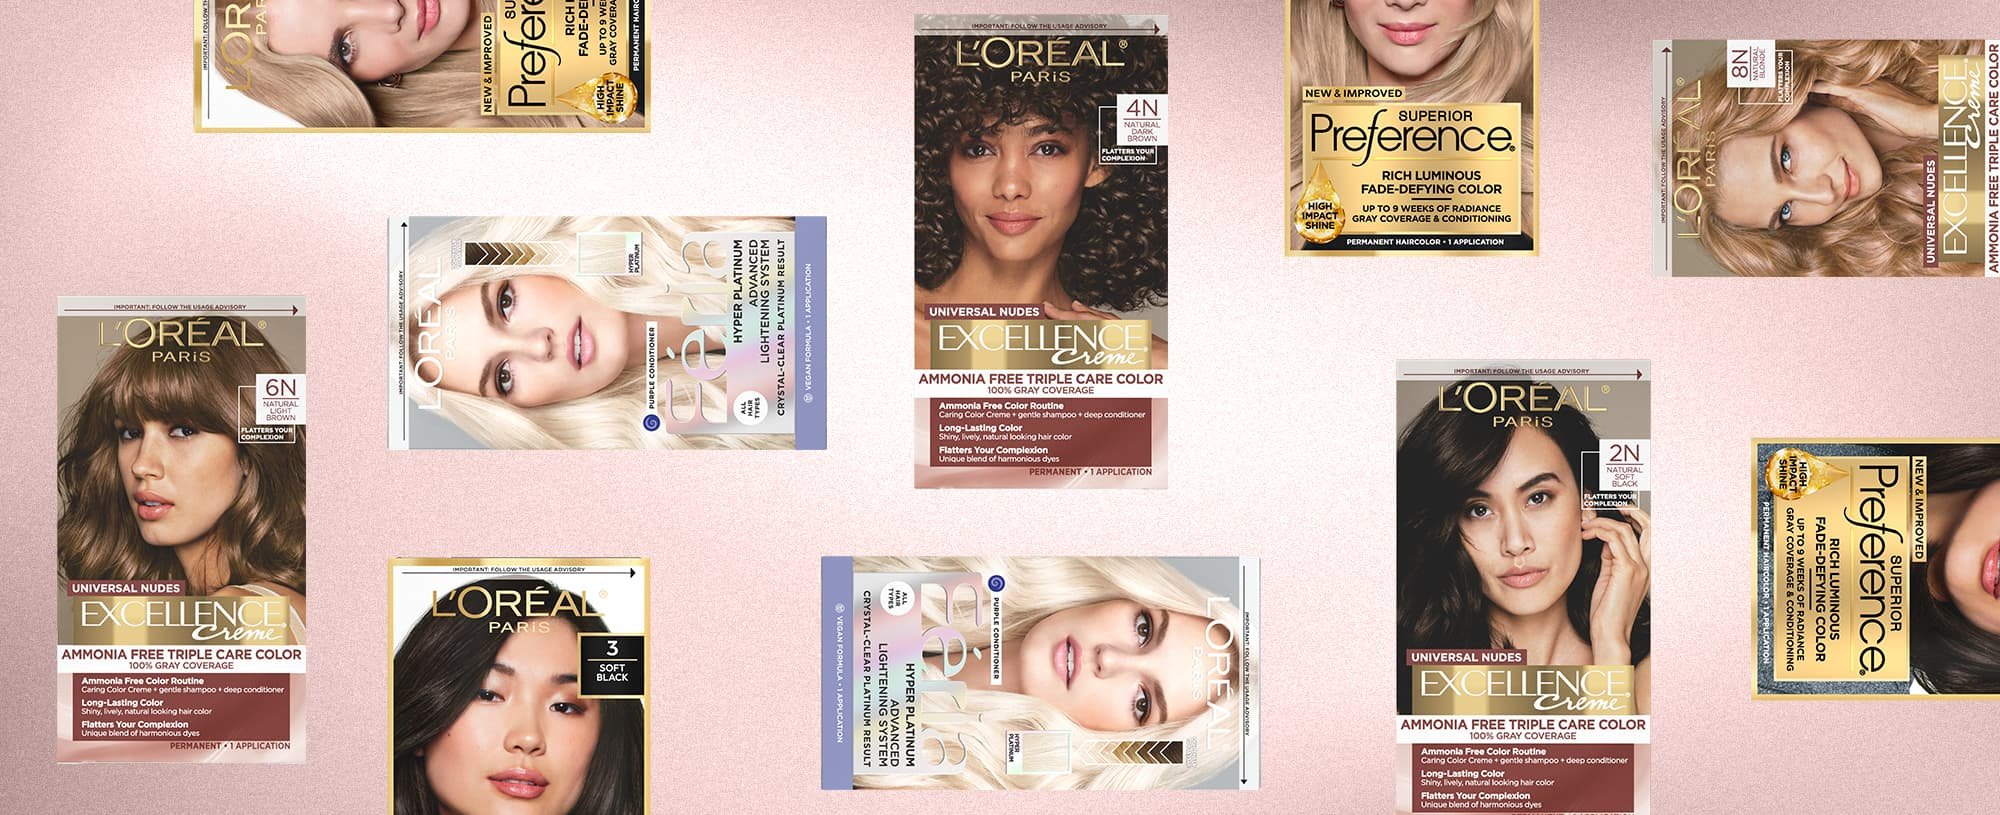 https://www.lorealparisusa.com/-/media/project/loreal/brand-sites/oap/americas/us/beauty-magazine/2024/feb/what-type-of-hair-color-is-best-for-me/banner-what-type-of-hair-color-is-best-for-me_desktop.jpg?rev=087d50046ff444ffa467f3e63b84953f&cx=0.25&cy=0.31&cw=2000&ch=815&hash=CEB3FD5B469D331A195C403672C8FA08F5AC80AD